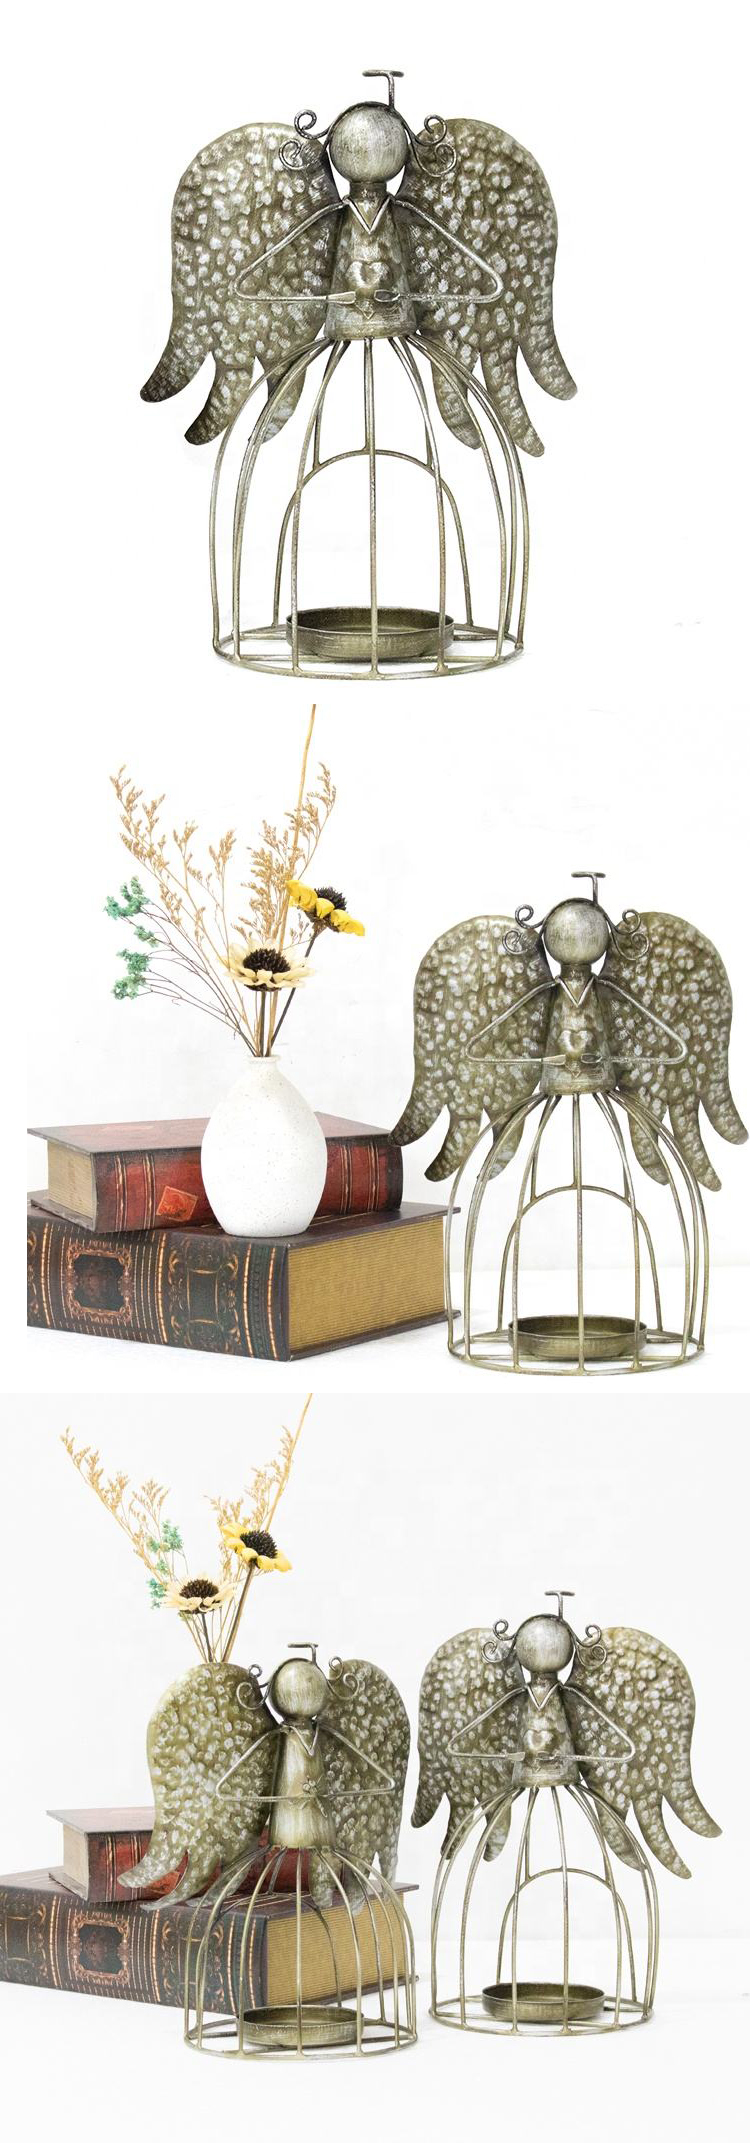 Low Price High Quality Product Antique Home Decor Bird Cage Pillar Candle Holder